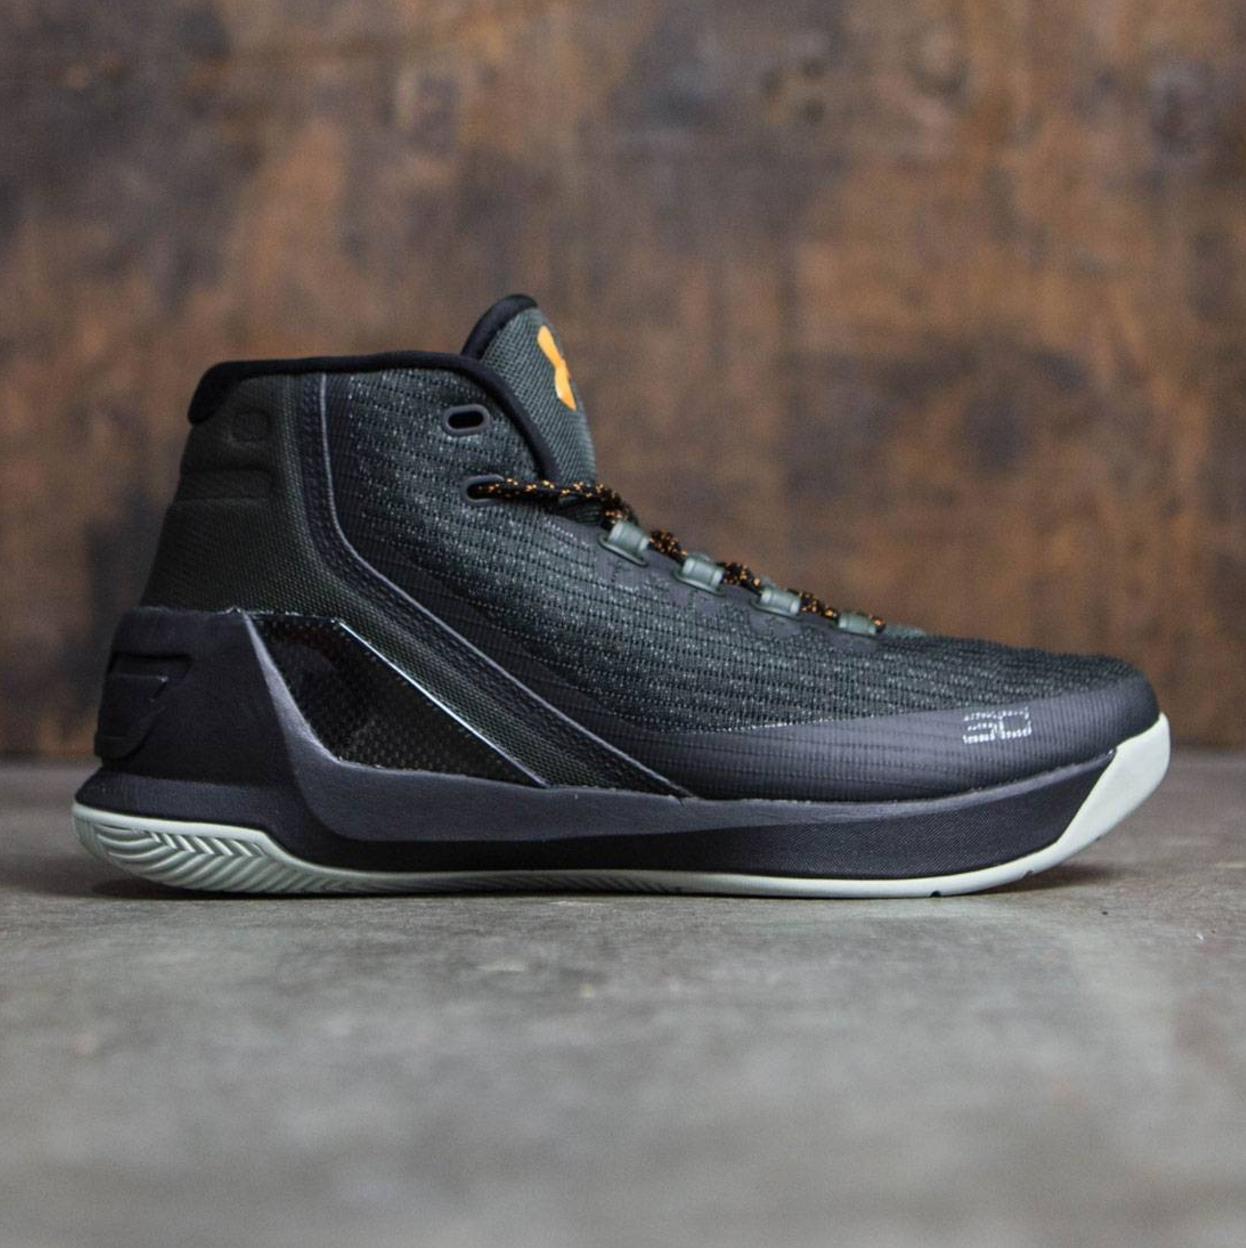 curry 3 black and white